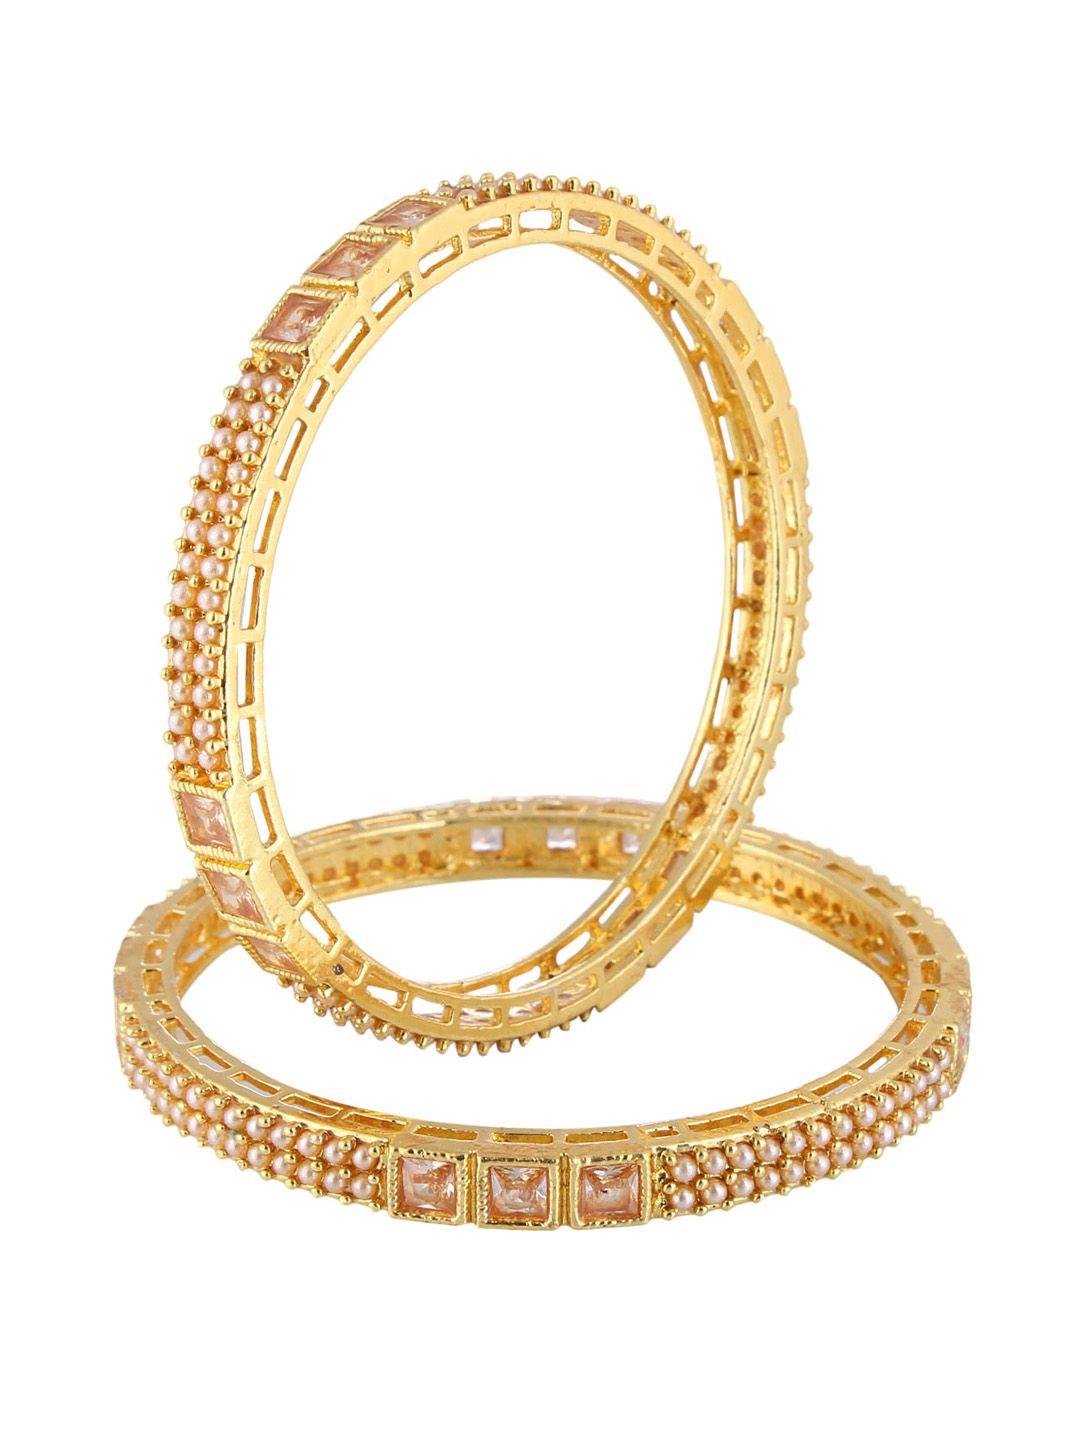 adwitiya collection set of 2 gold-plated & beige stone-studded handcrafted bangles